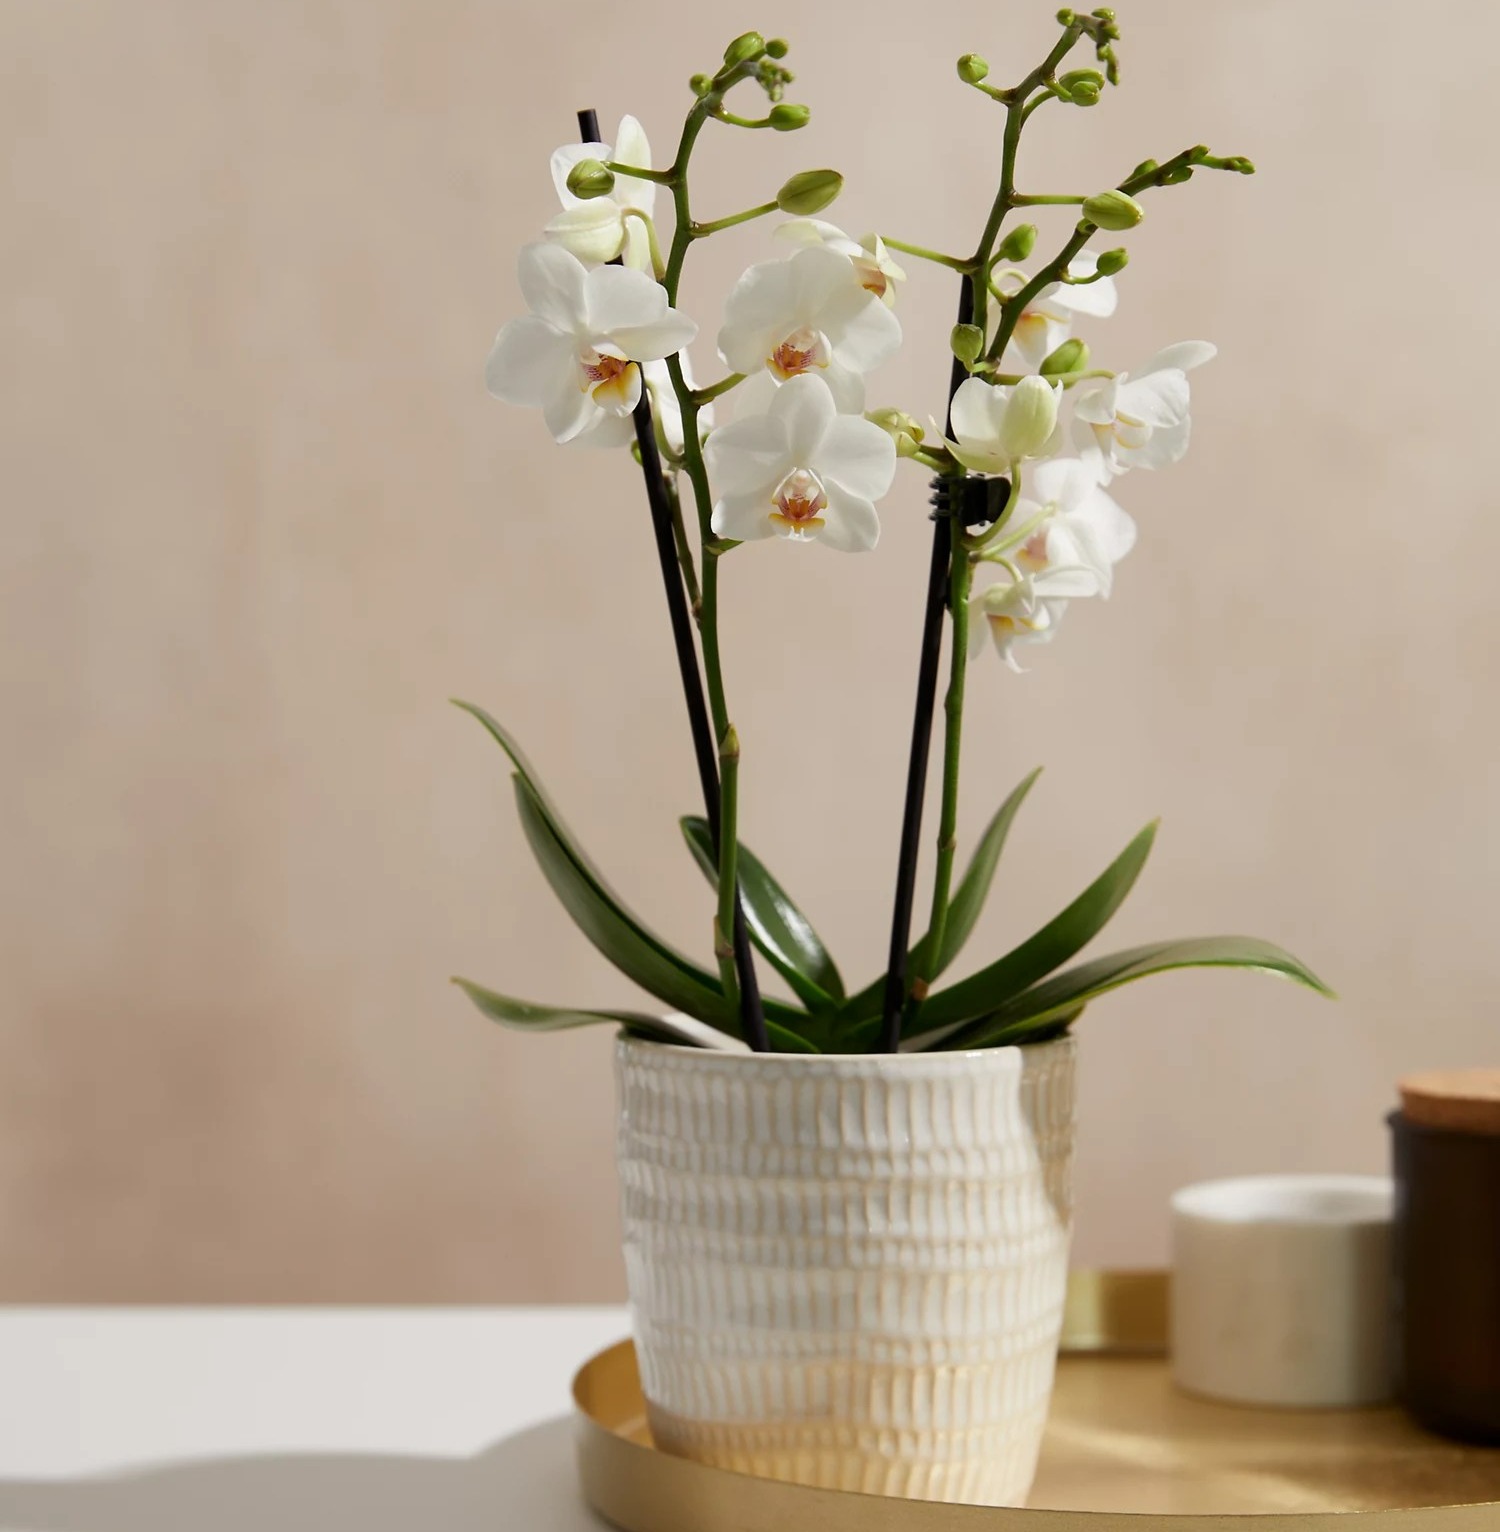 Orchids are a more decorative choice